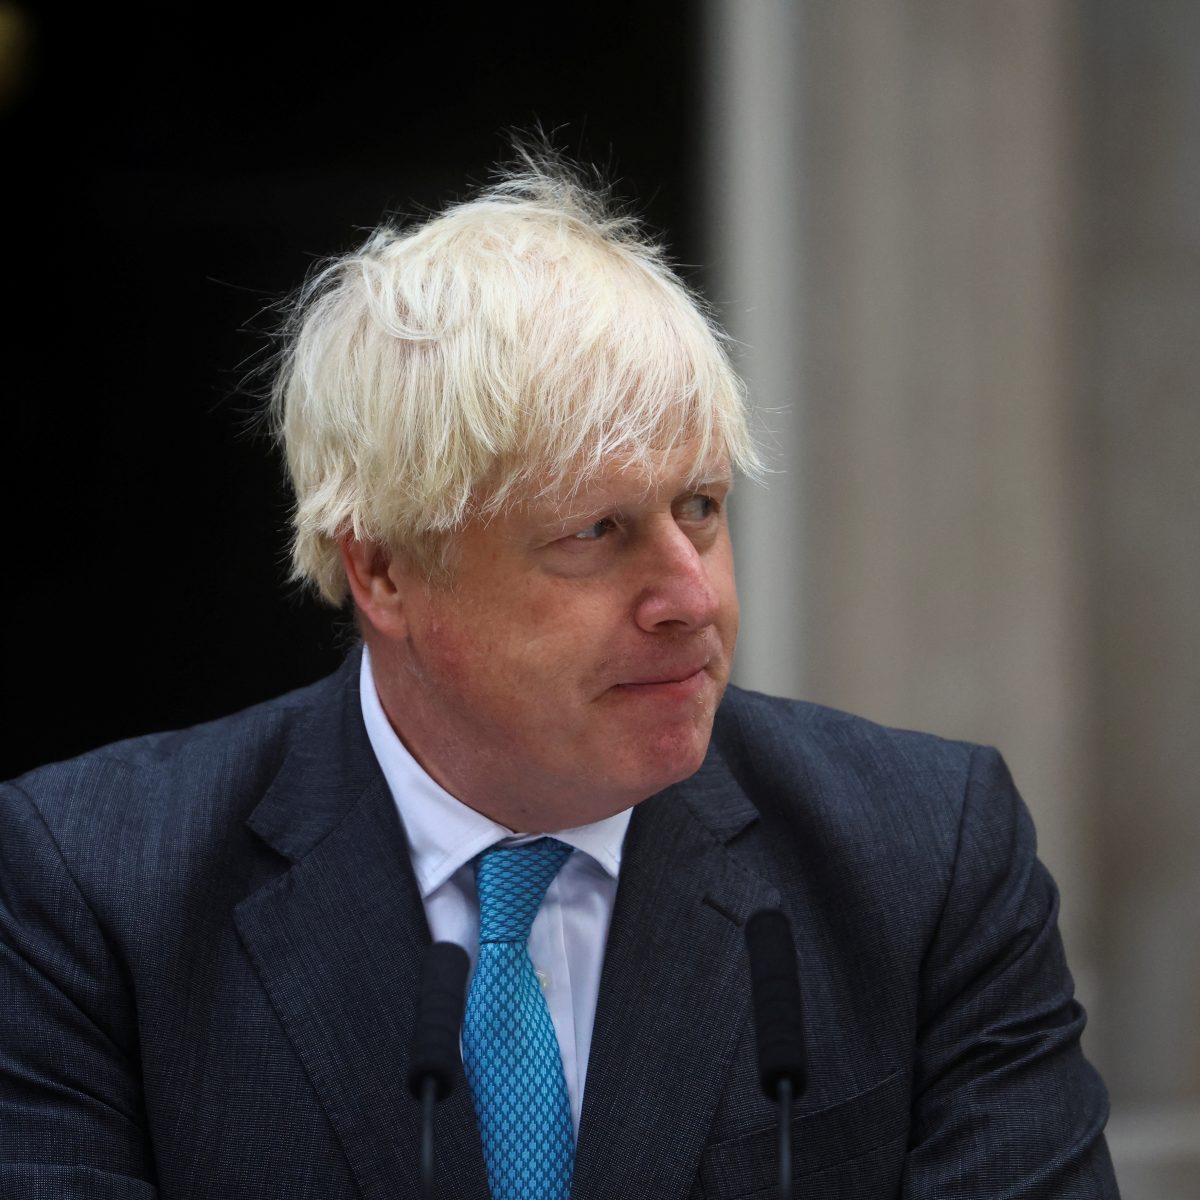 Boris Johnson used his first journalistic column to talk about diet pills